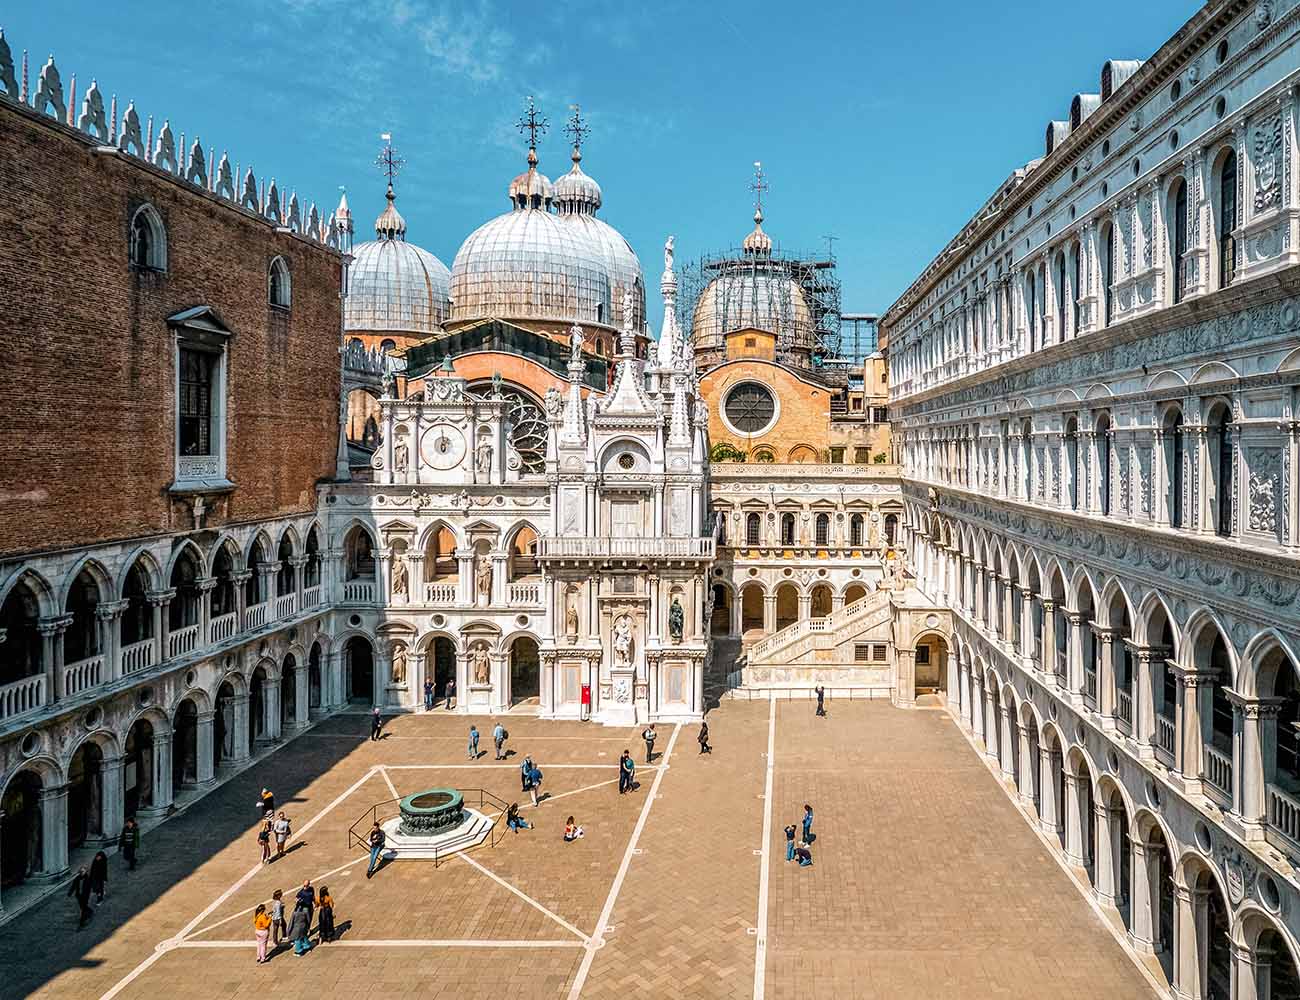 A large courtyard with several stories of brick or colonnaded walls on three sides, with the round domes of the church of San Marco in the background.